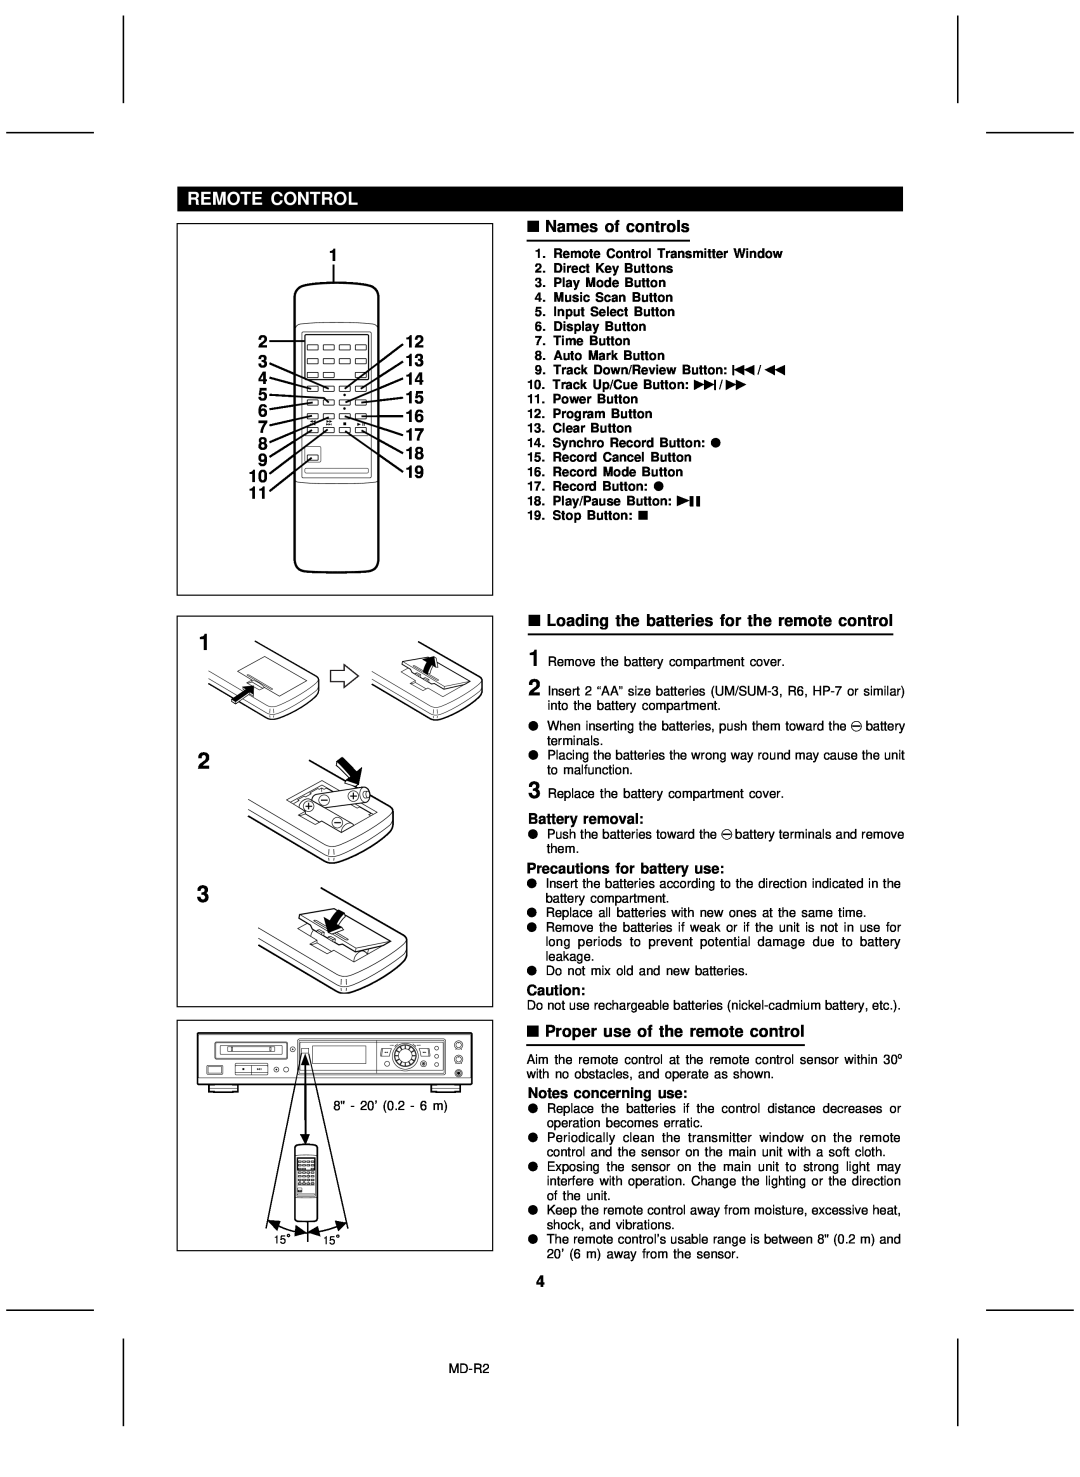 Kenwood MD-R2 operation manual Remote Control, Names of controls, Loading the batteries for the remote control 